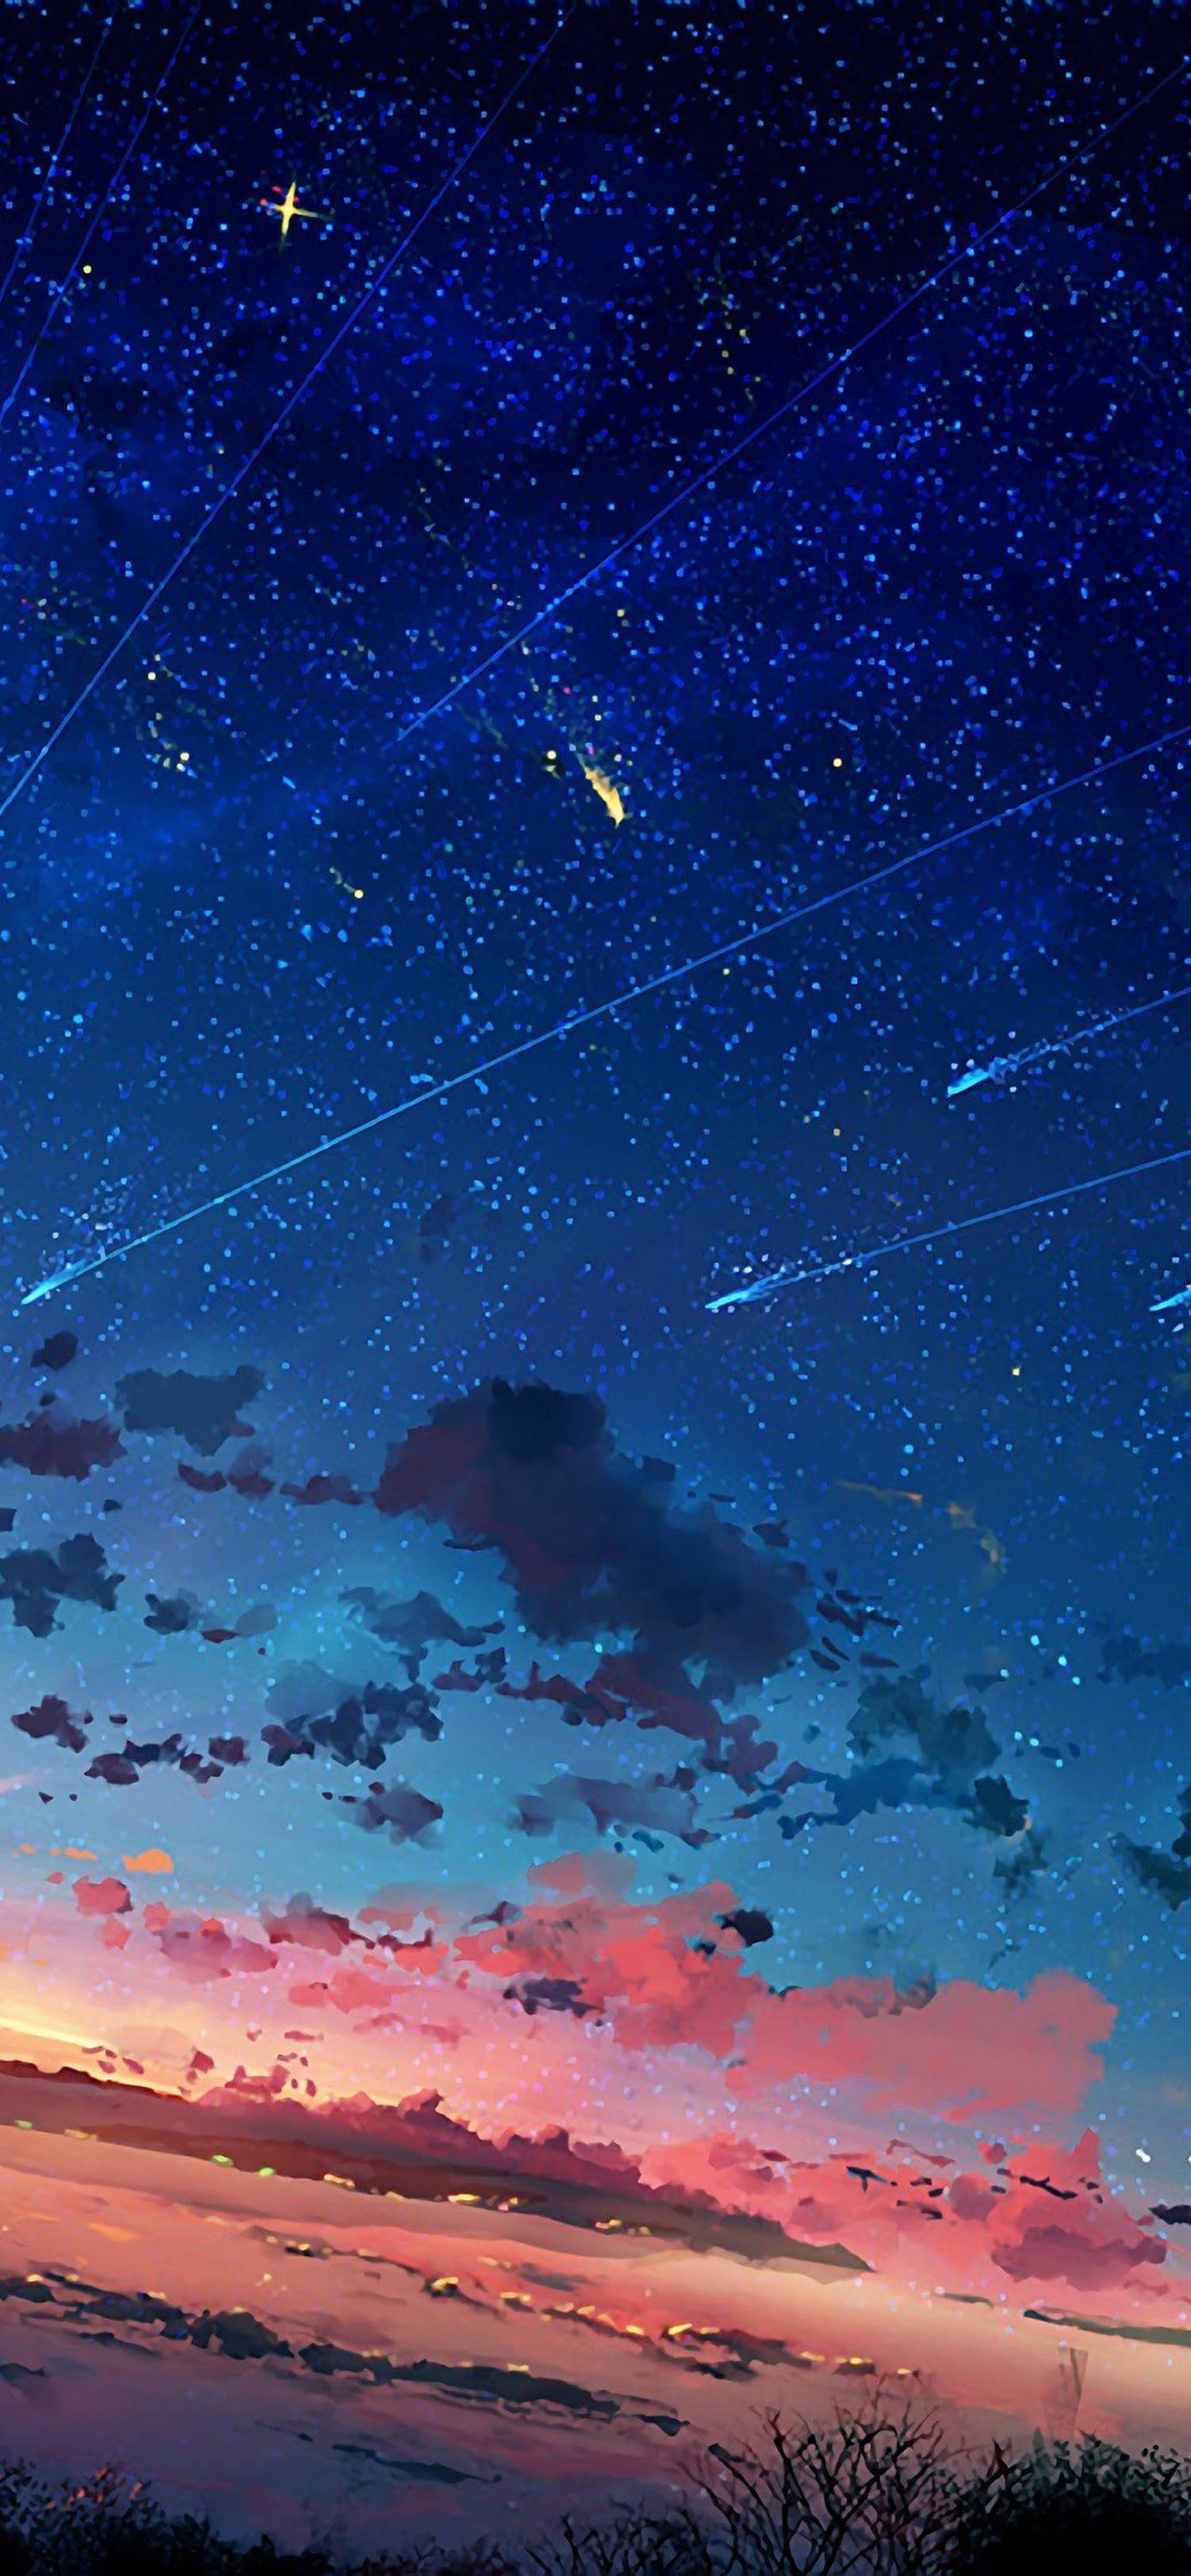 4k Anime Iphone Falling Stars And Comet Background